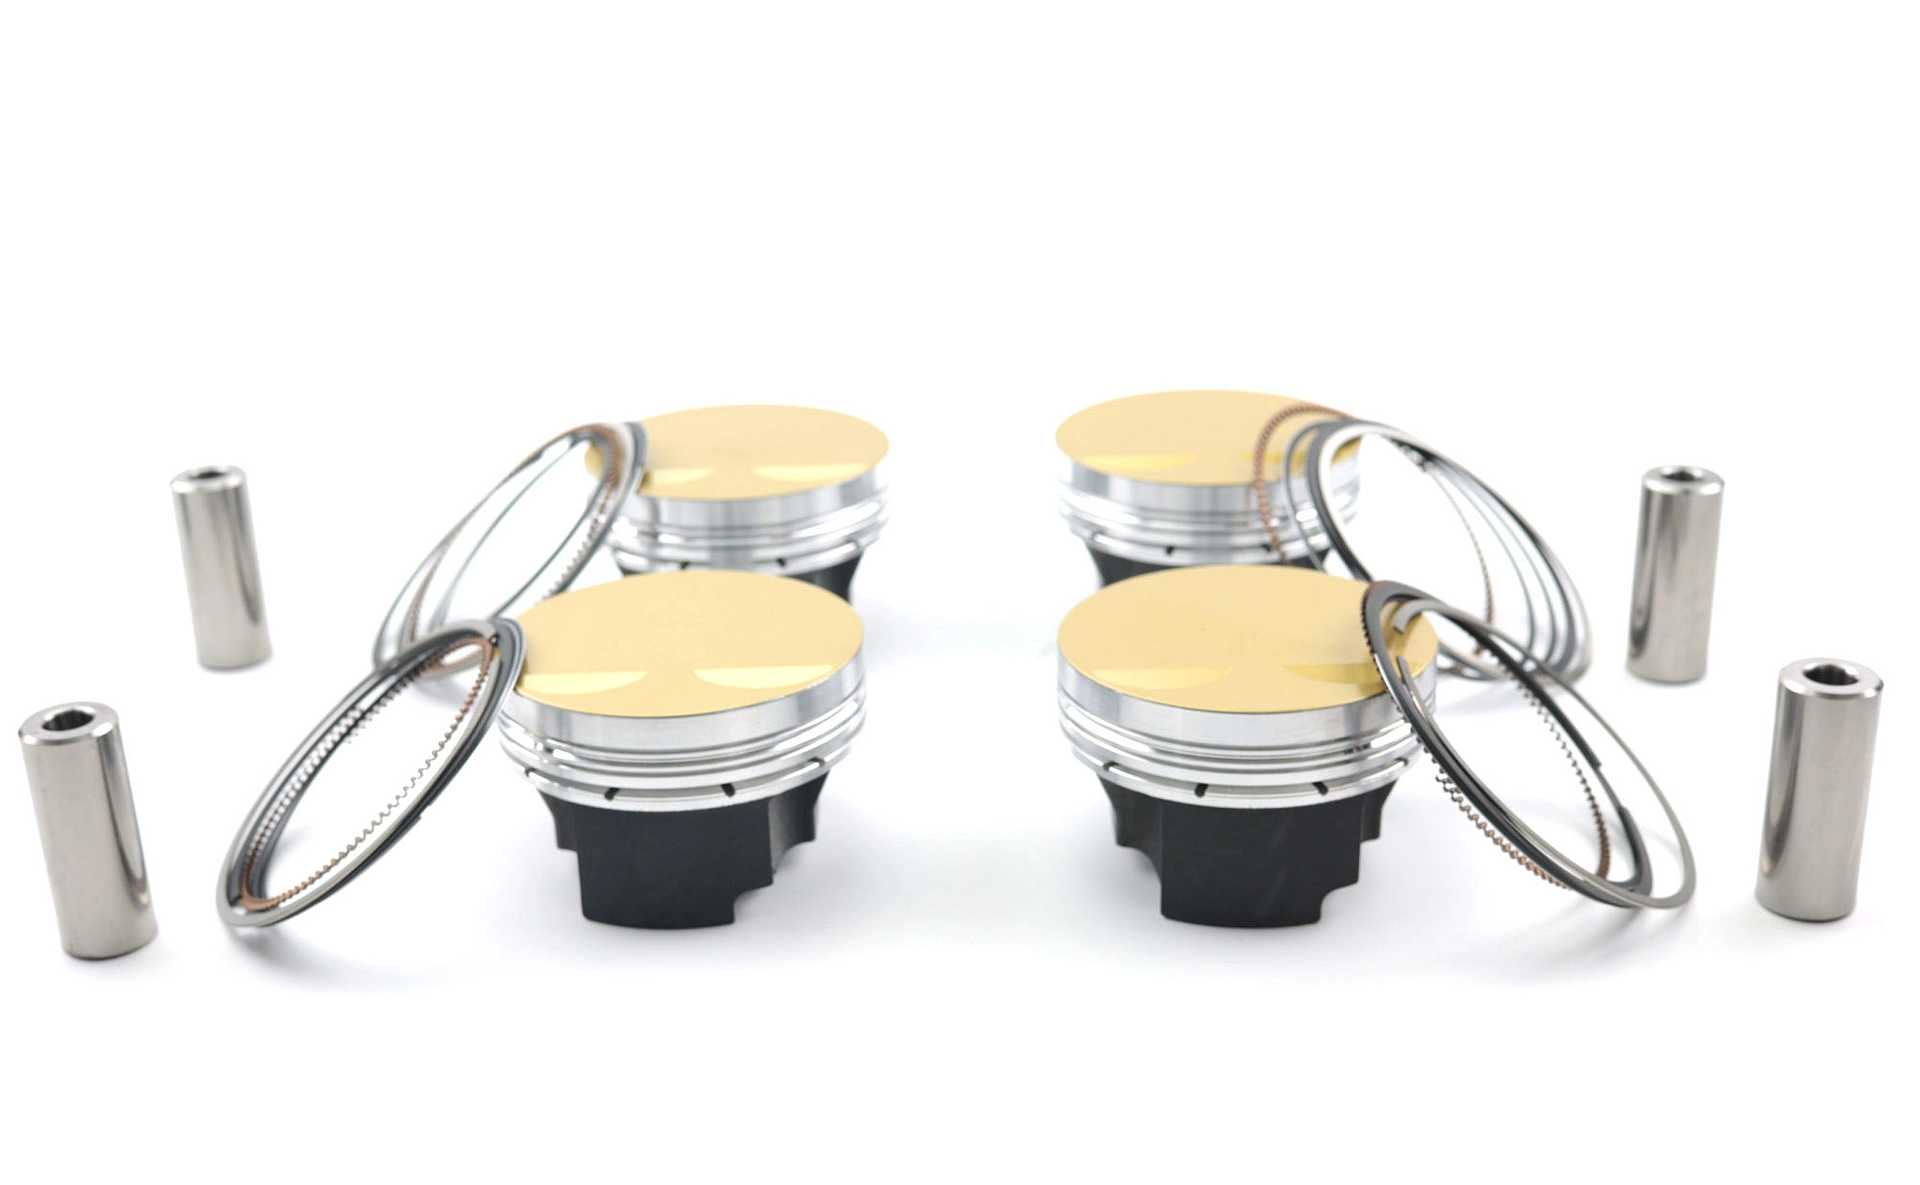 2.0L TSI with Chain Driven High Performance Pistons-Kit JE